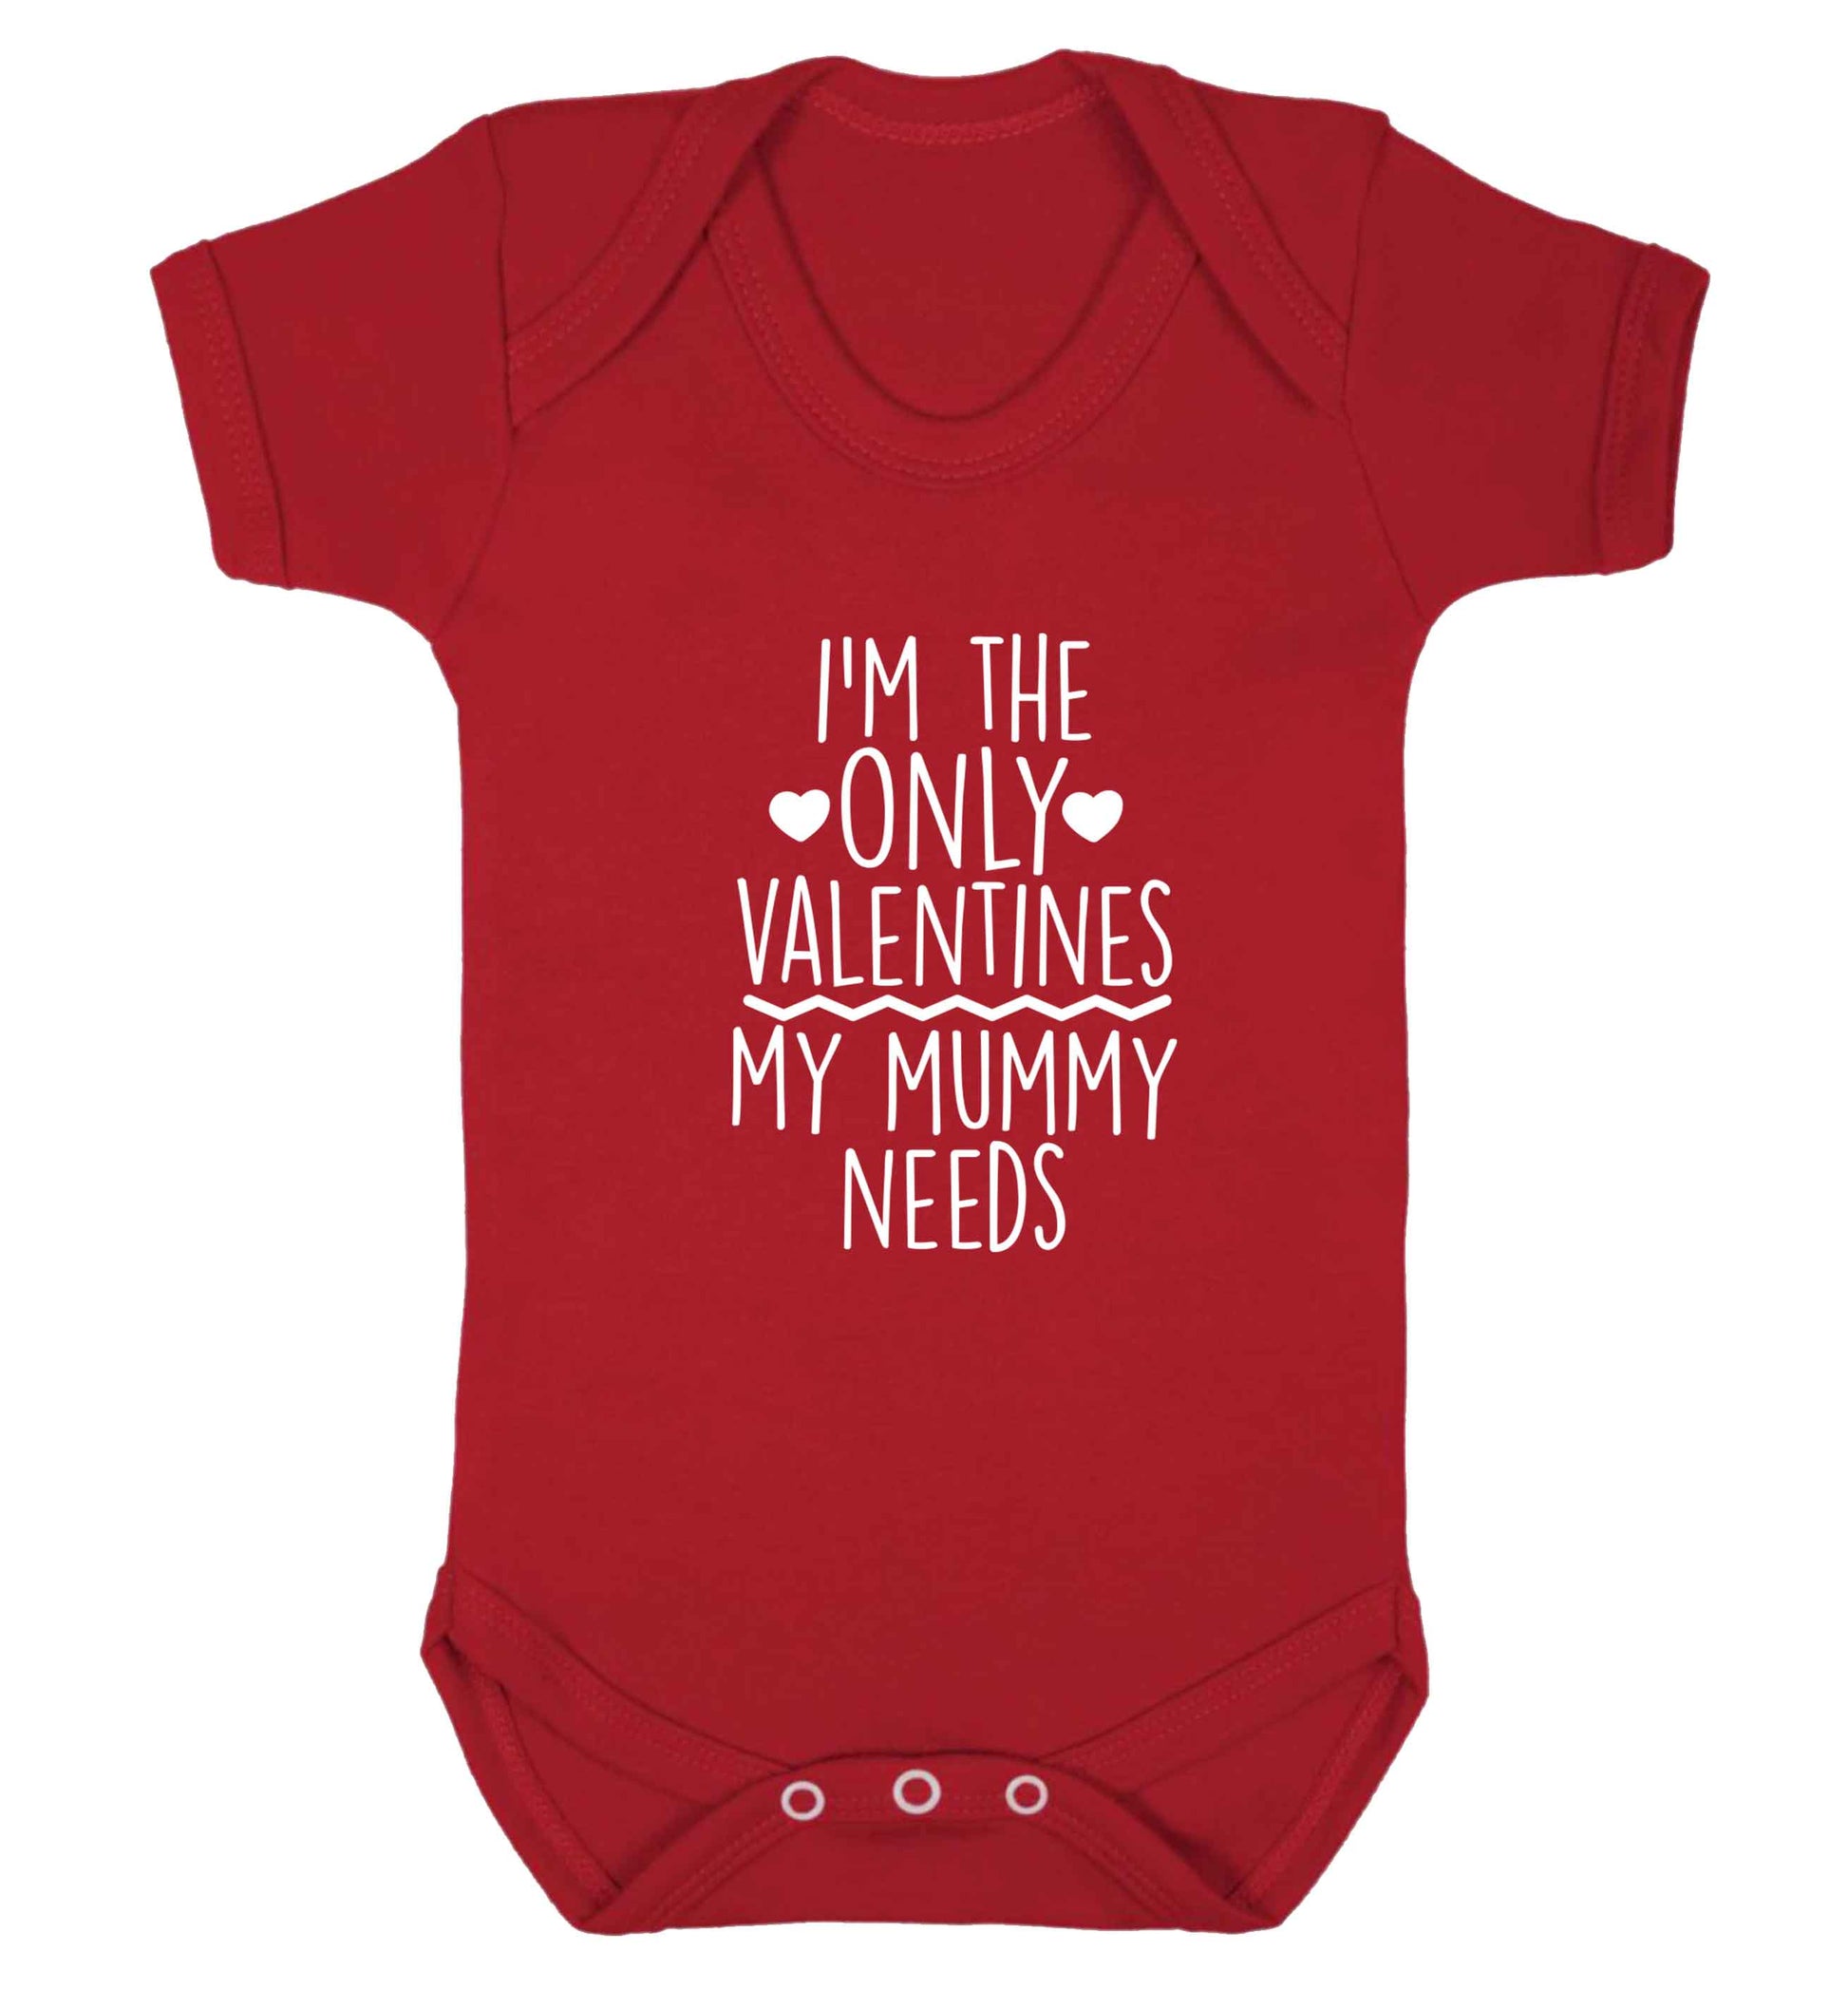 I'm the only valentines my mummy needs baby vest red 18-24 months